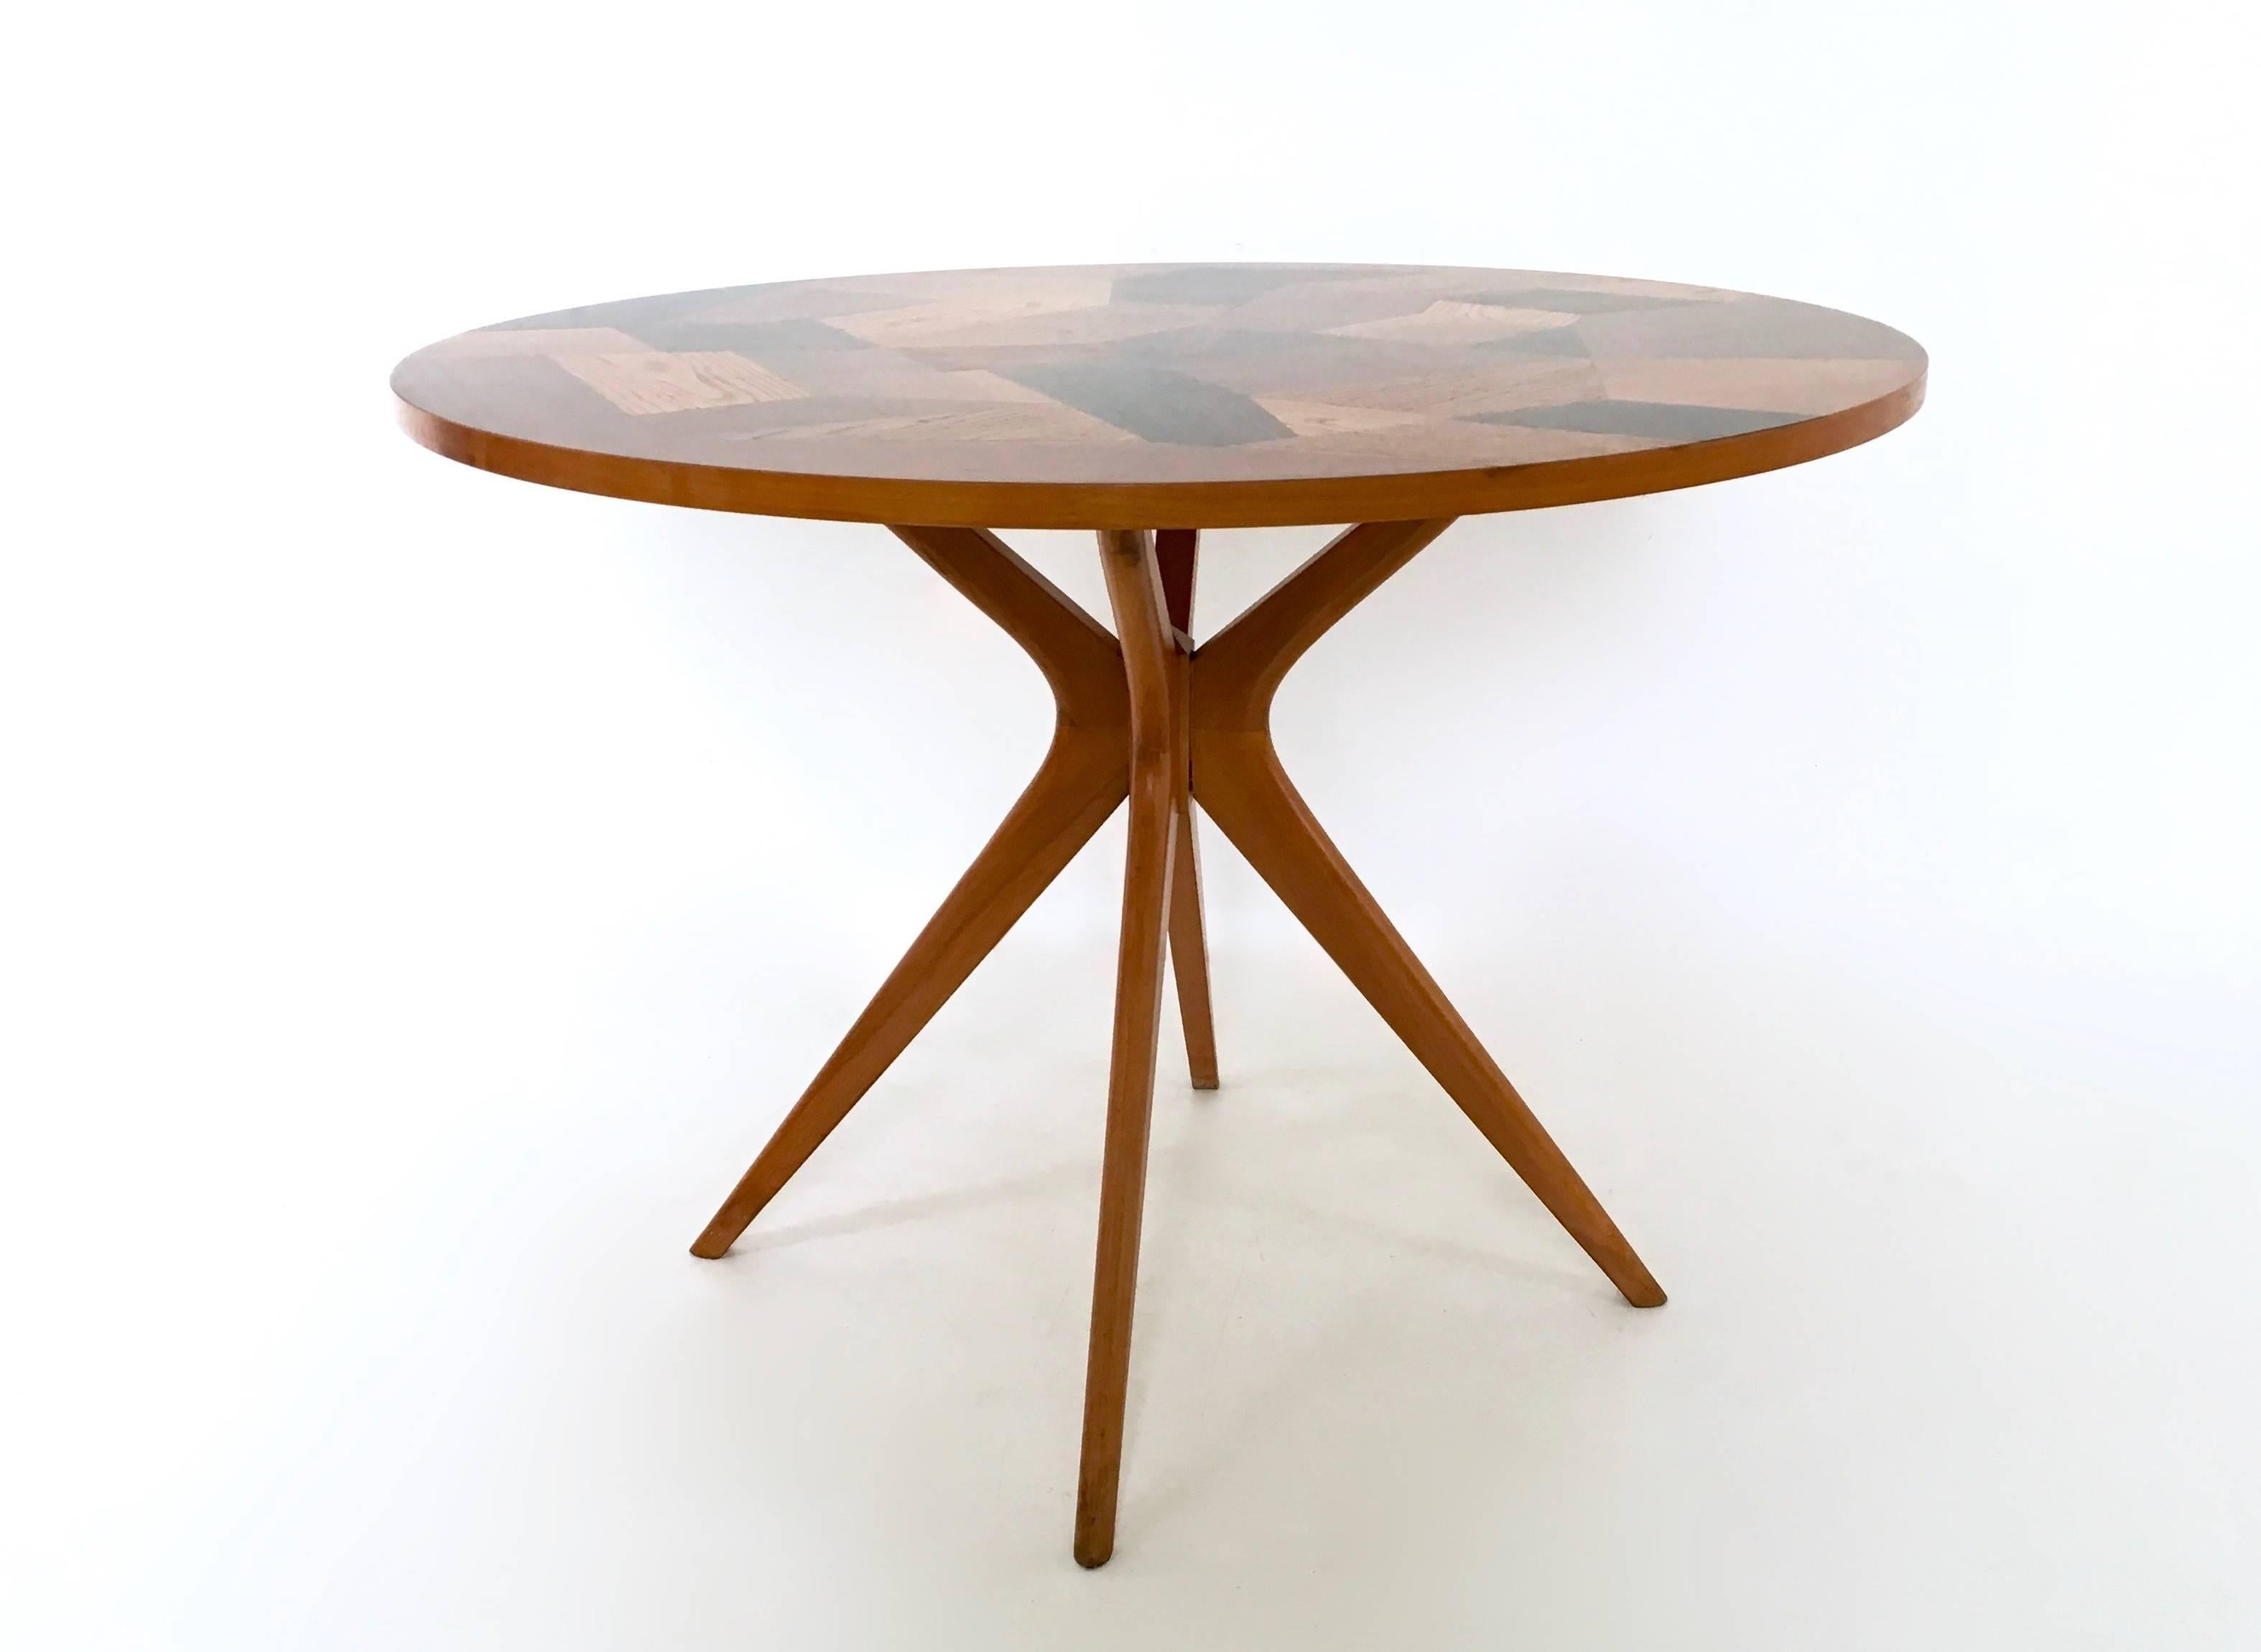 It was designed by Enzio Wenk. 
This table has a manually veneered top made from different woods and a beech leg. 
It was made in 2012 and is in perfect condition. 

This is a unique piece.
  